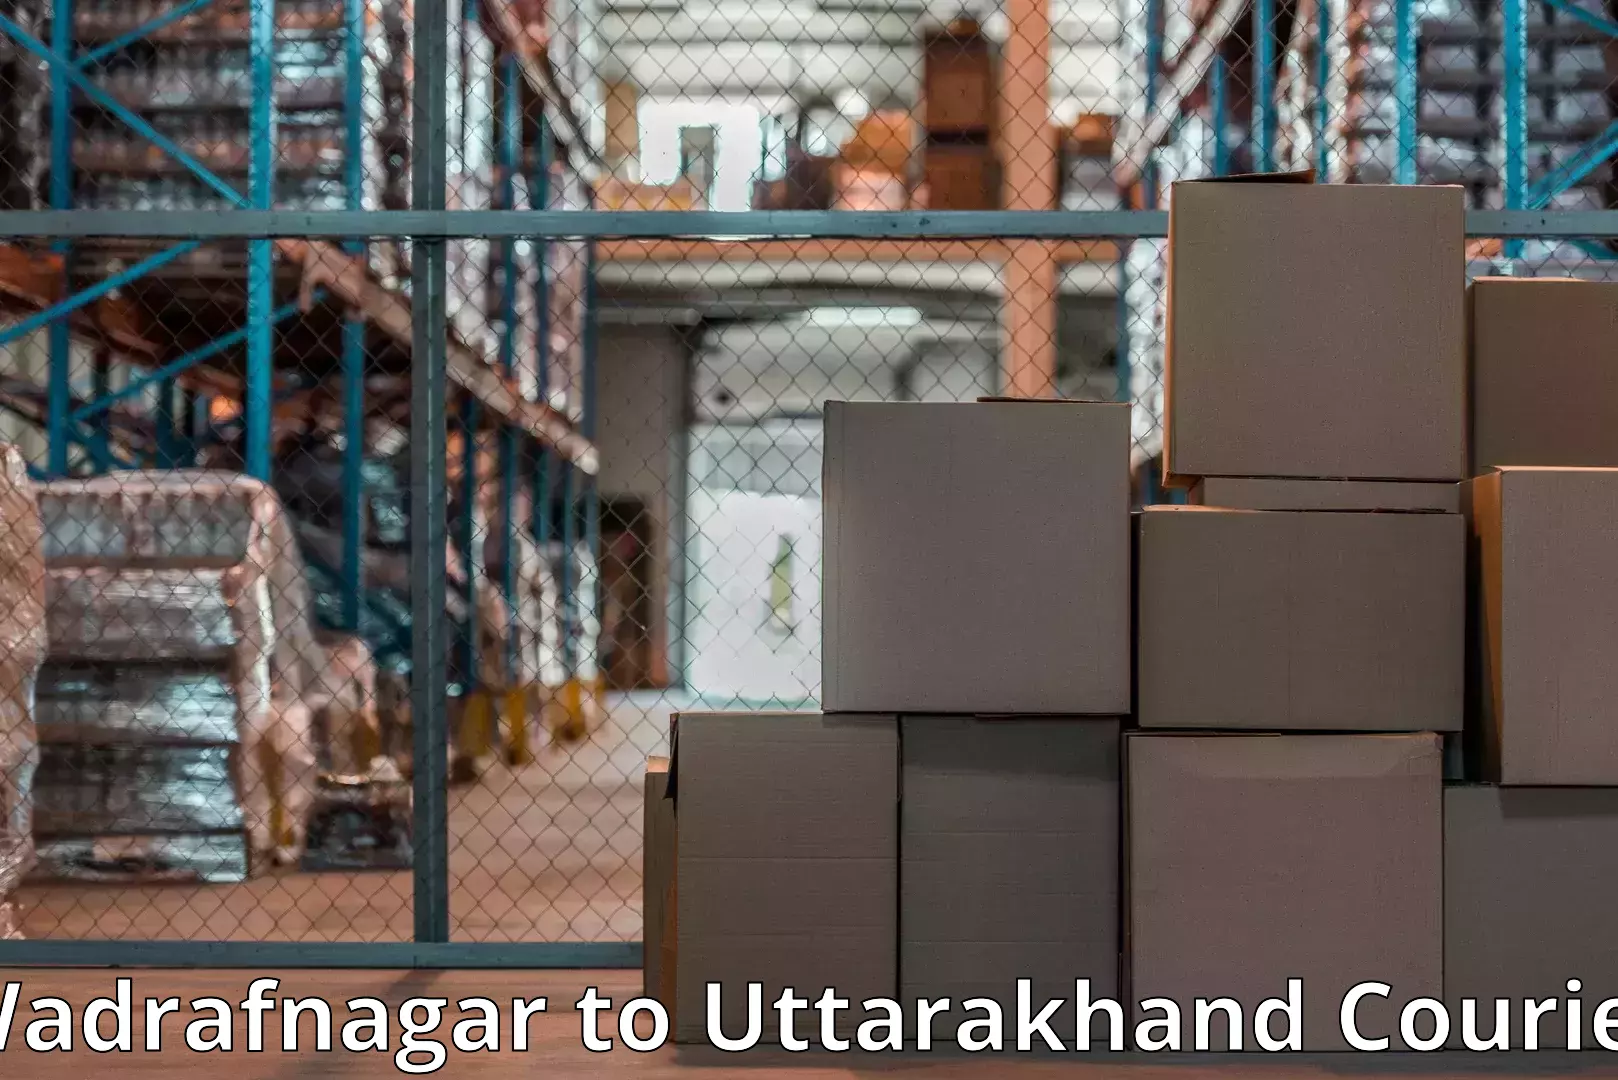 Moving and packing experts Wadrafnagar to Bhagwanpur